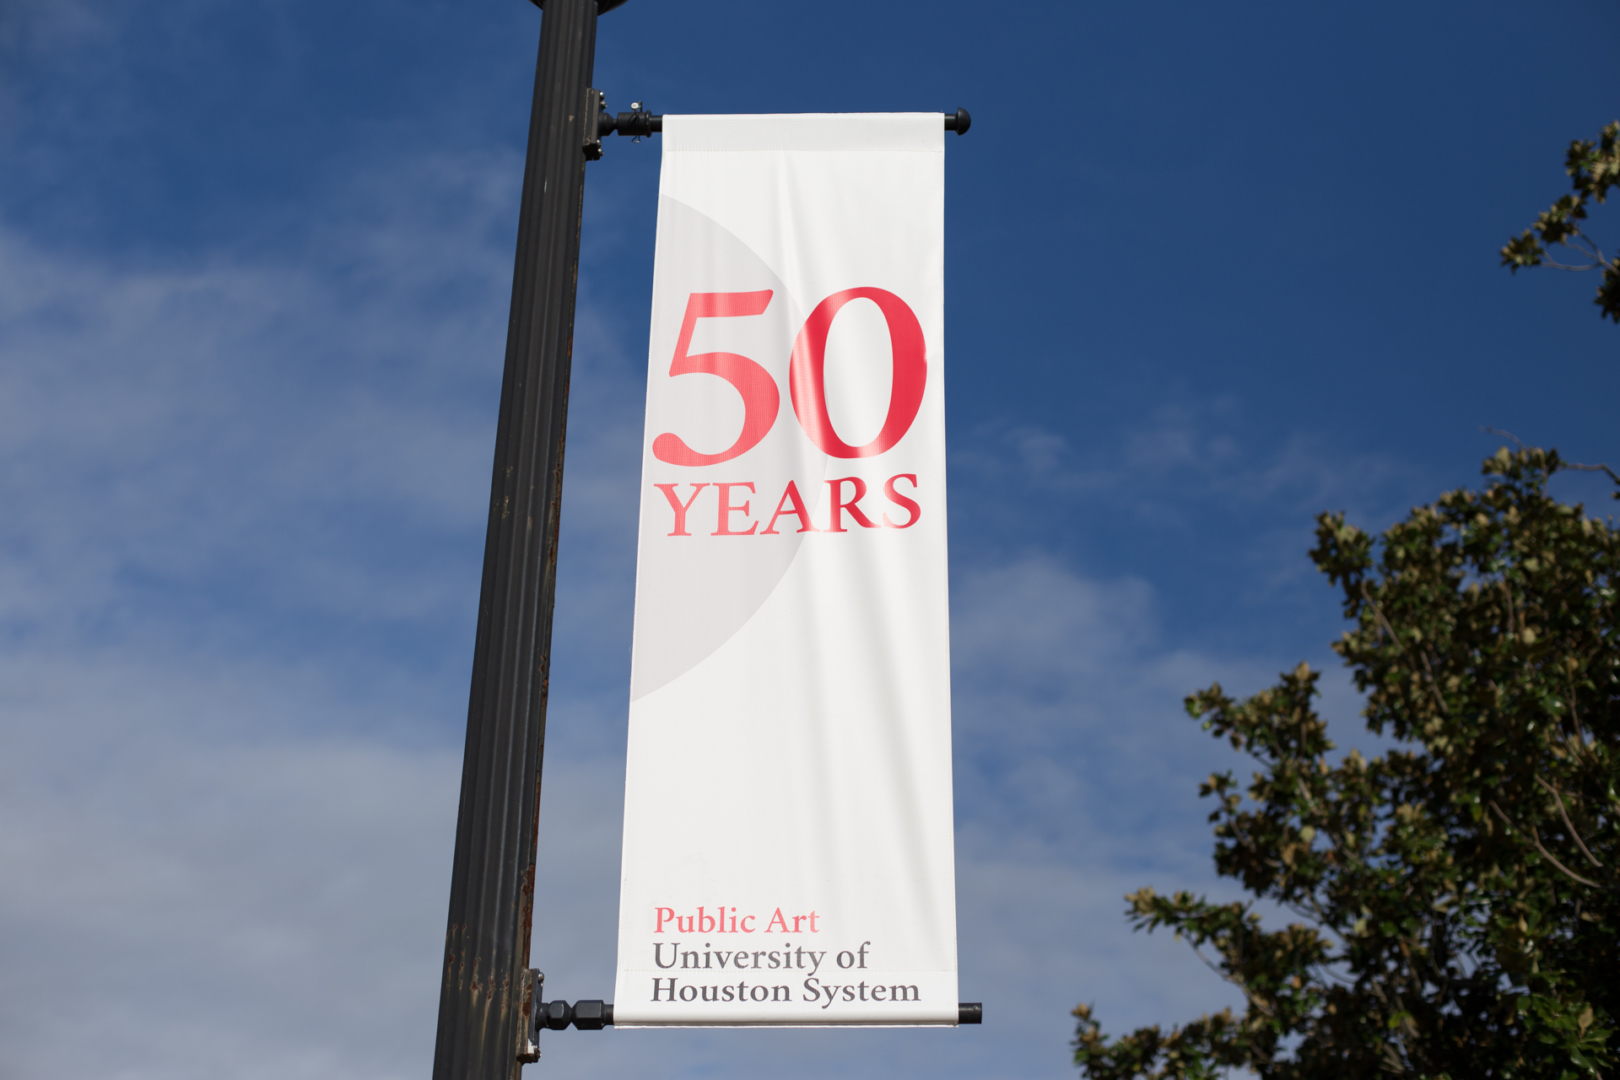 Many programs at the University are celebrating their 50th anniversary this year. | Trevor Nolley/The Cougar